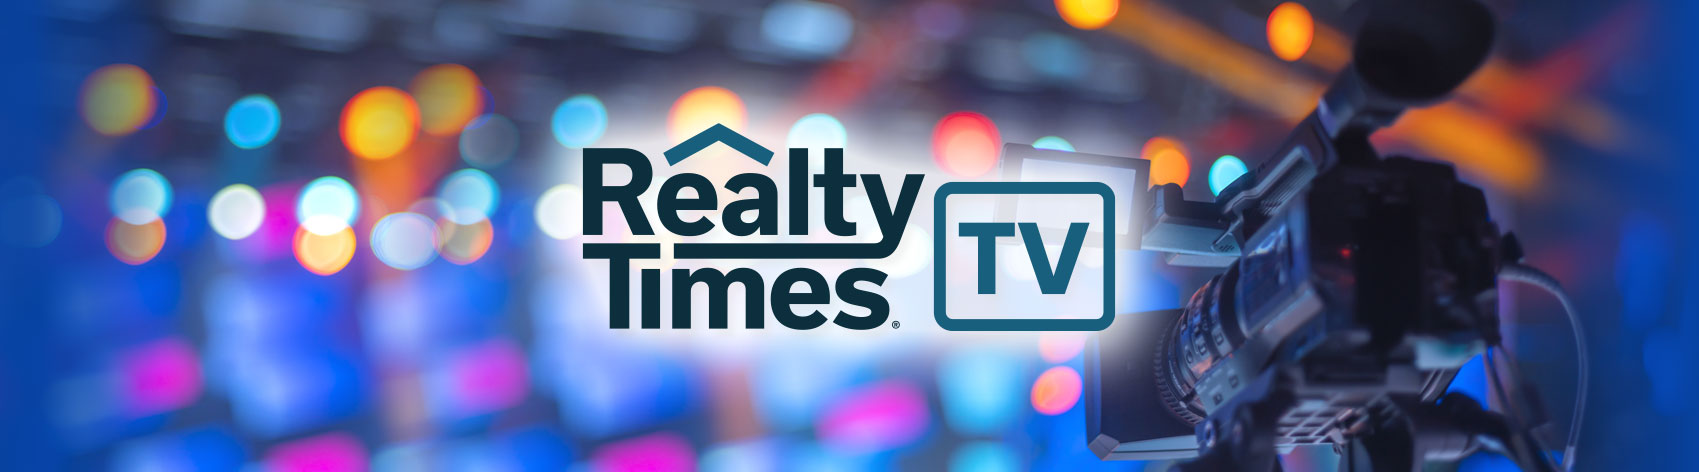 Realty Times TV 